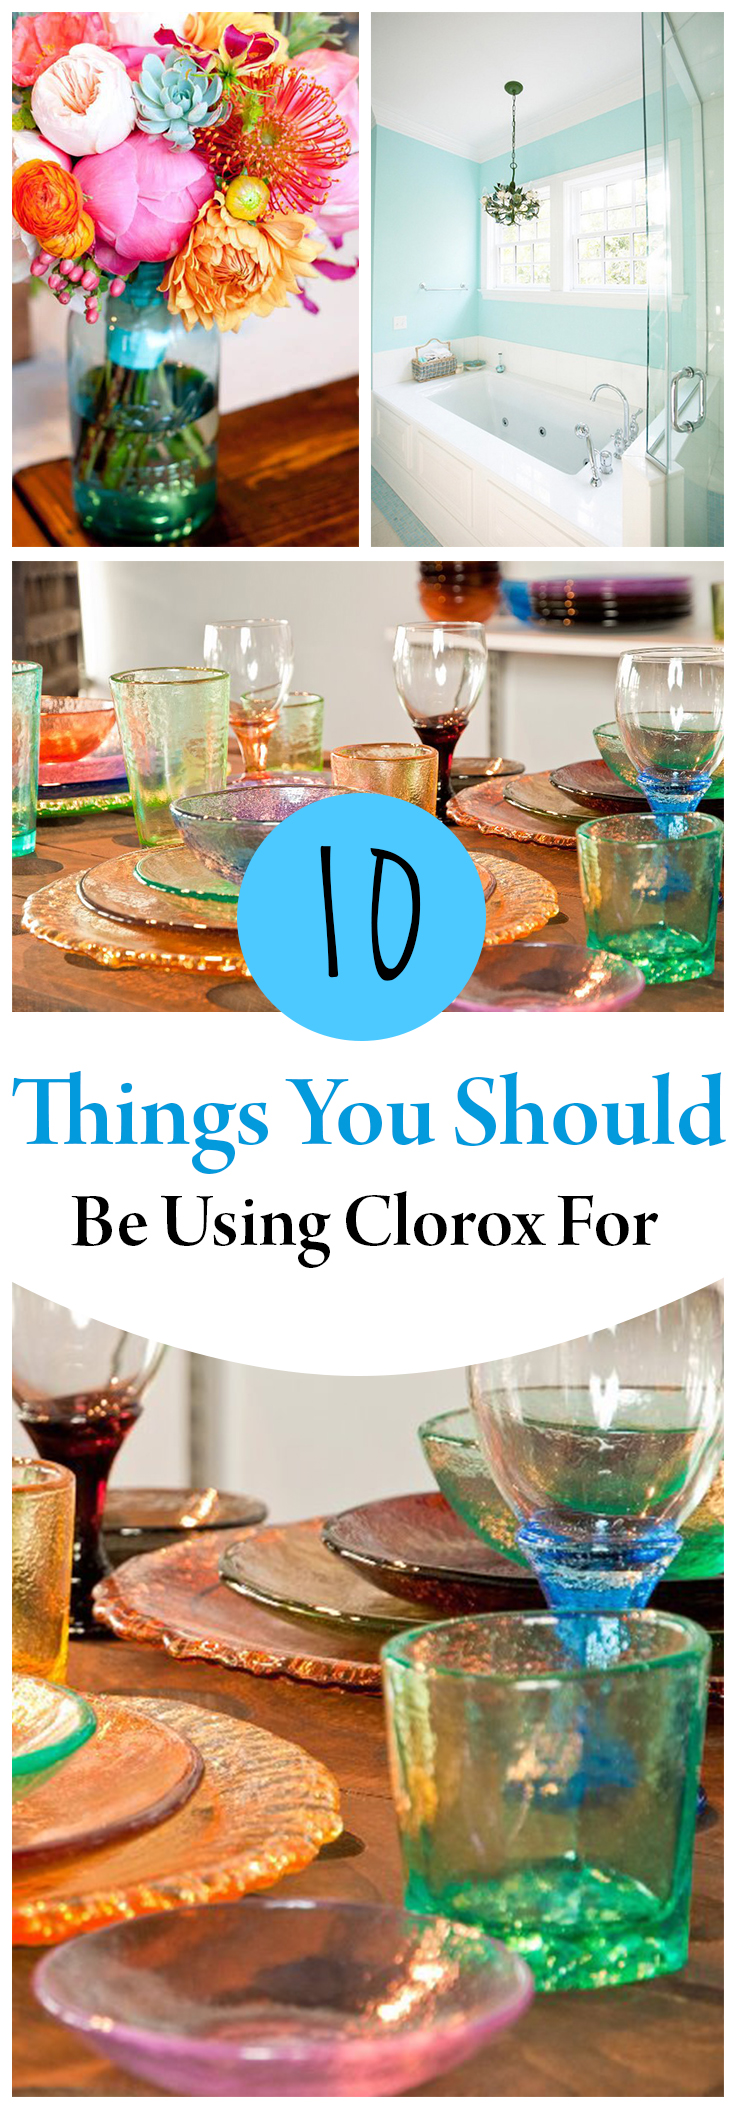 10 Things You Should Be Using Clorox For 4